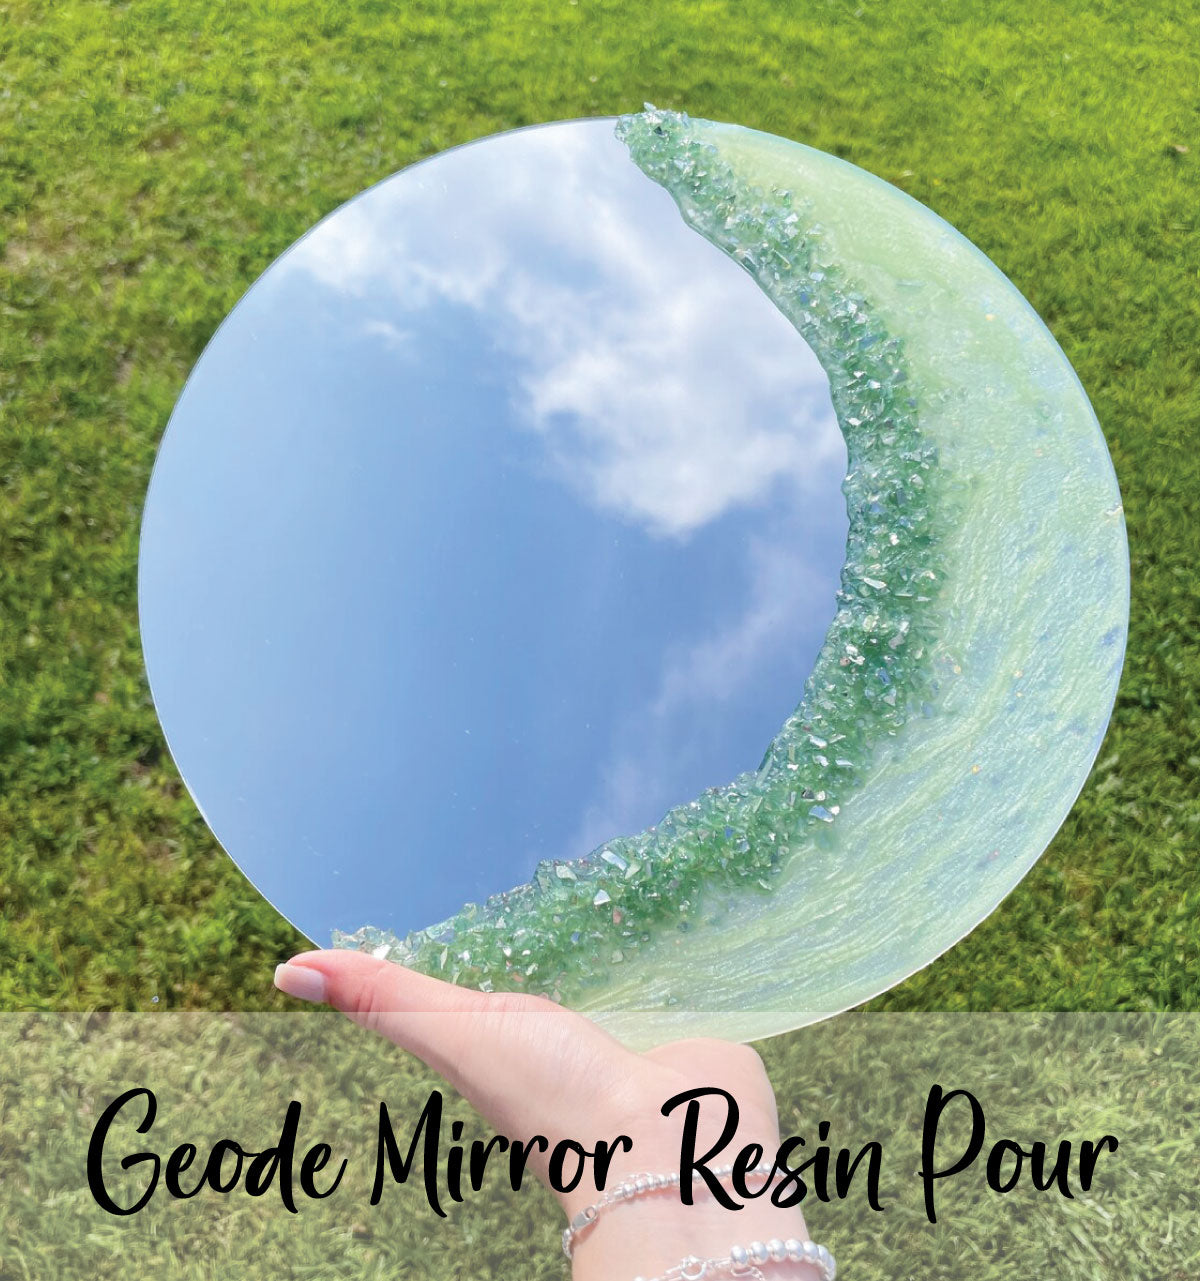 3/12 Geode Mirror Resin Pour @7PM